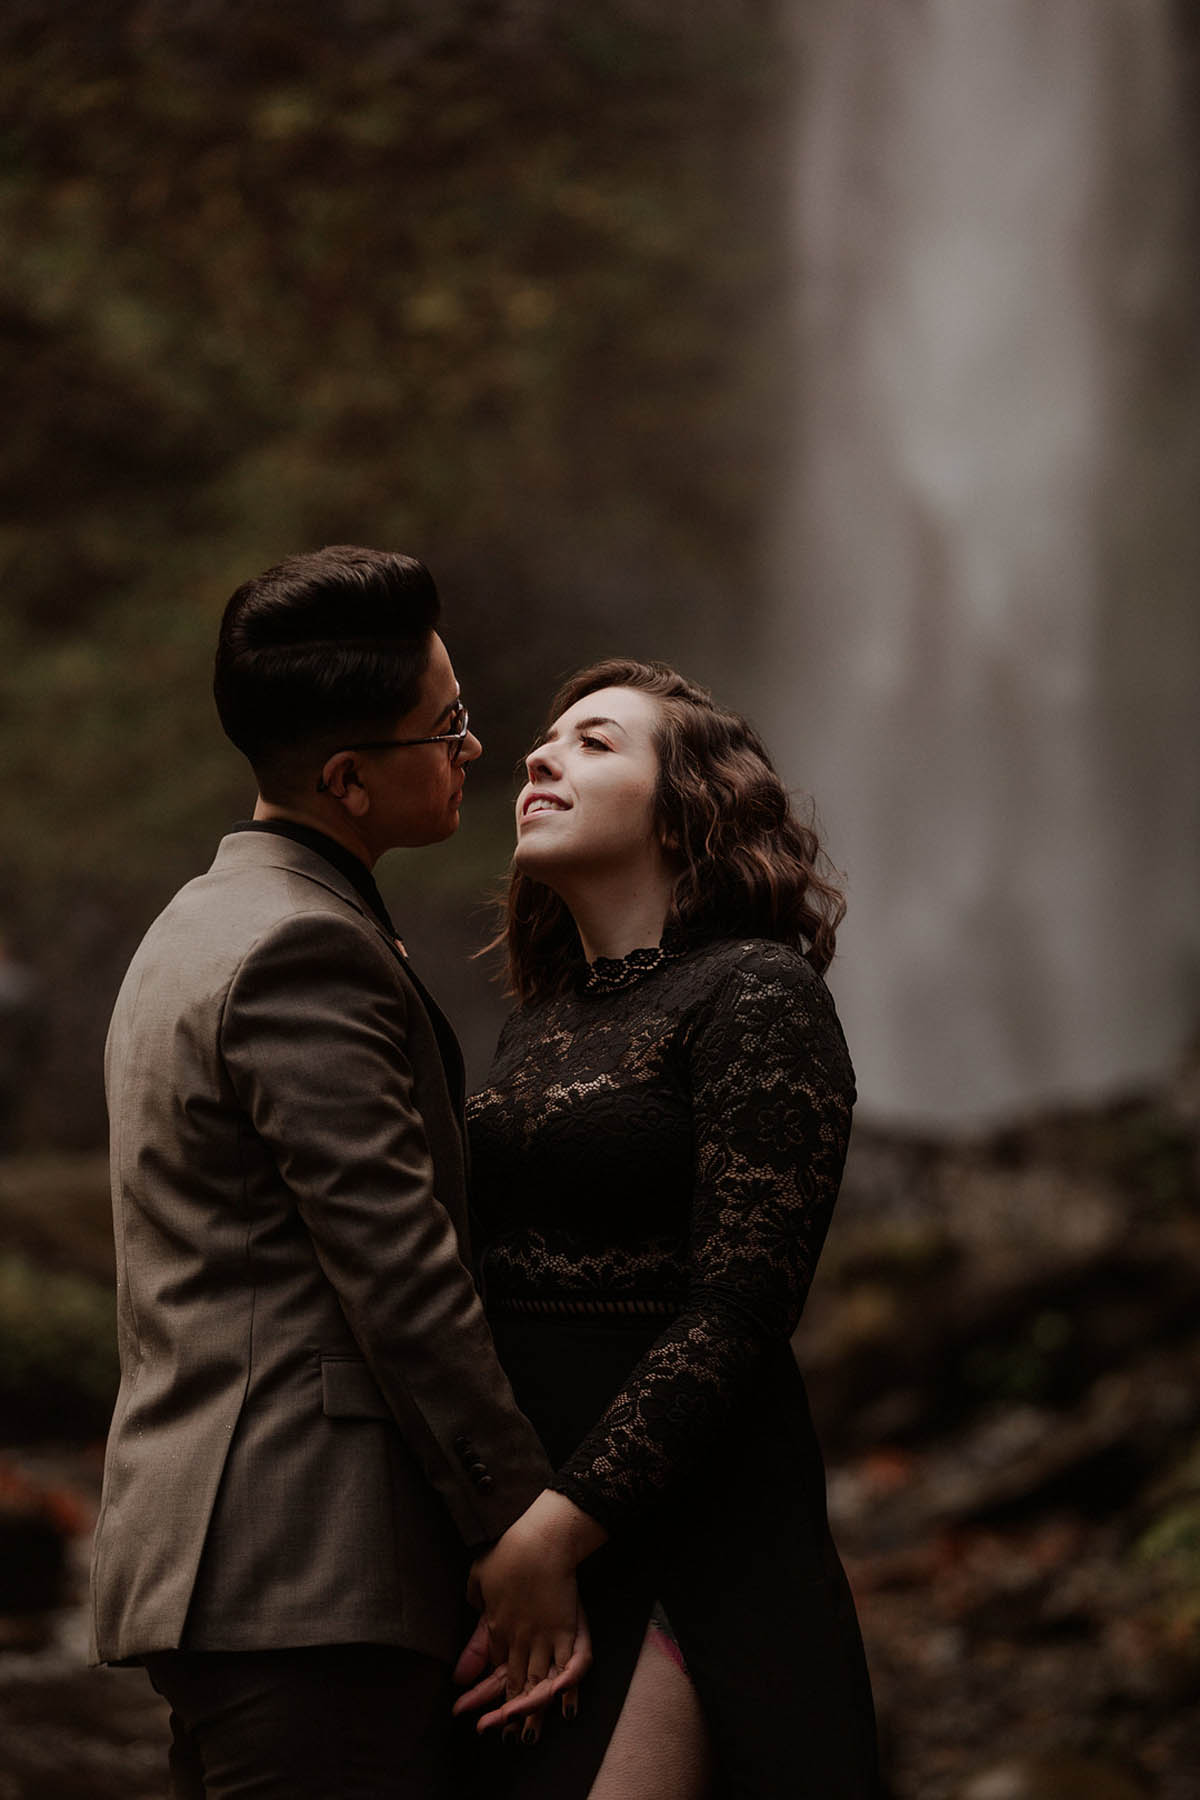 Dark-and-moody photoshoot turns into romantic proposal at the base of a waterfall